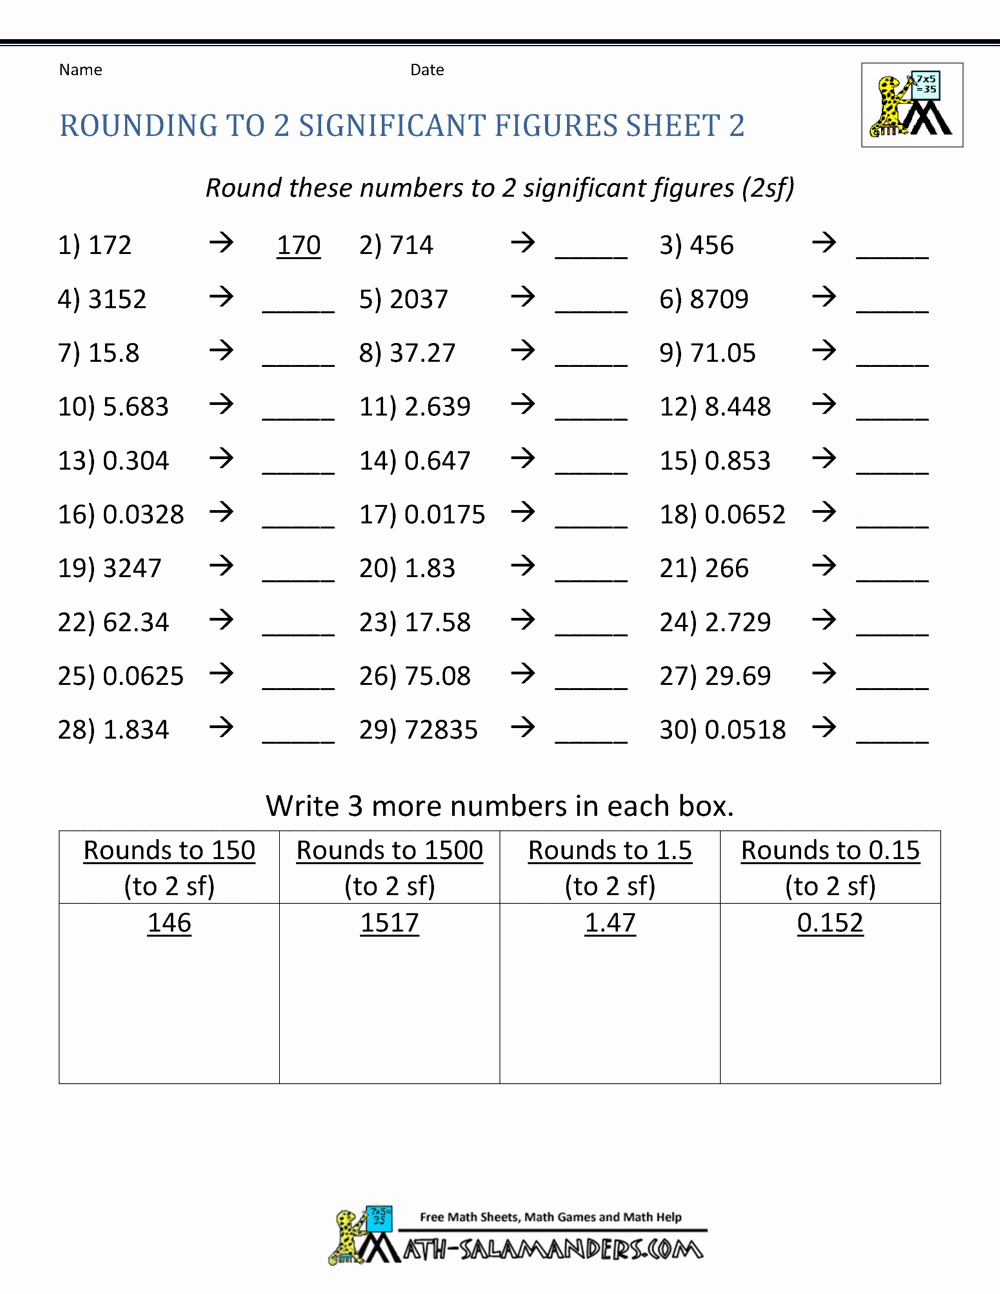 Sig Figs Worksheet with Answers Best Of Rounding Significant Figures